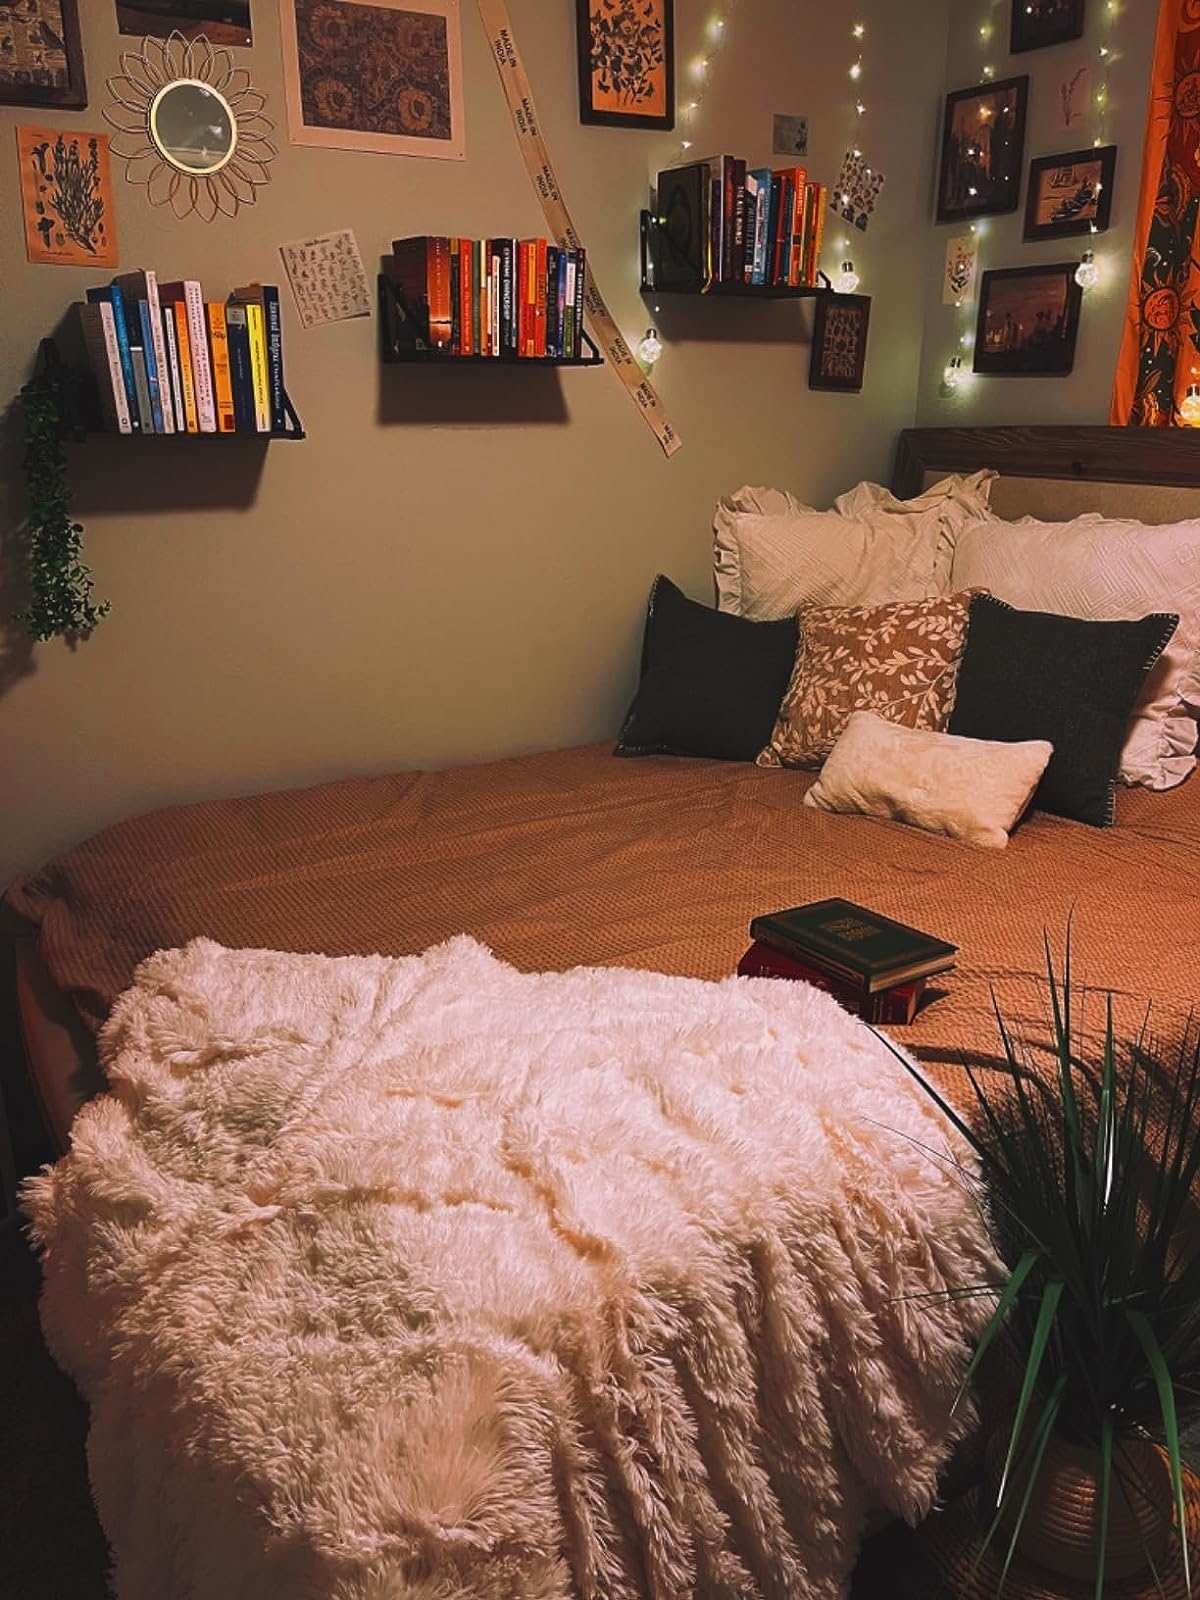 5 Tips for Creating a Cozy Bedroom - Organize by Dreams